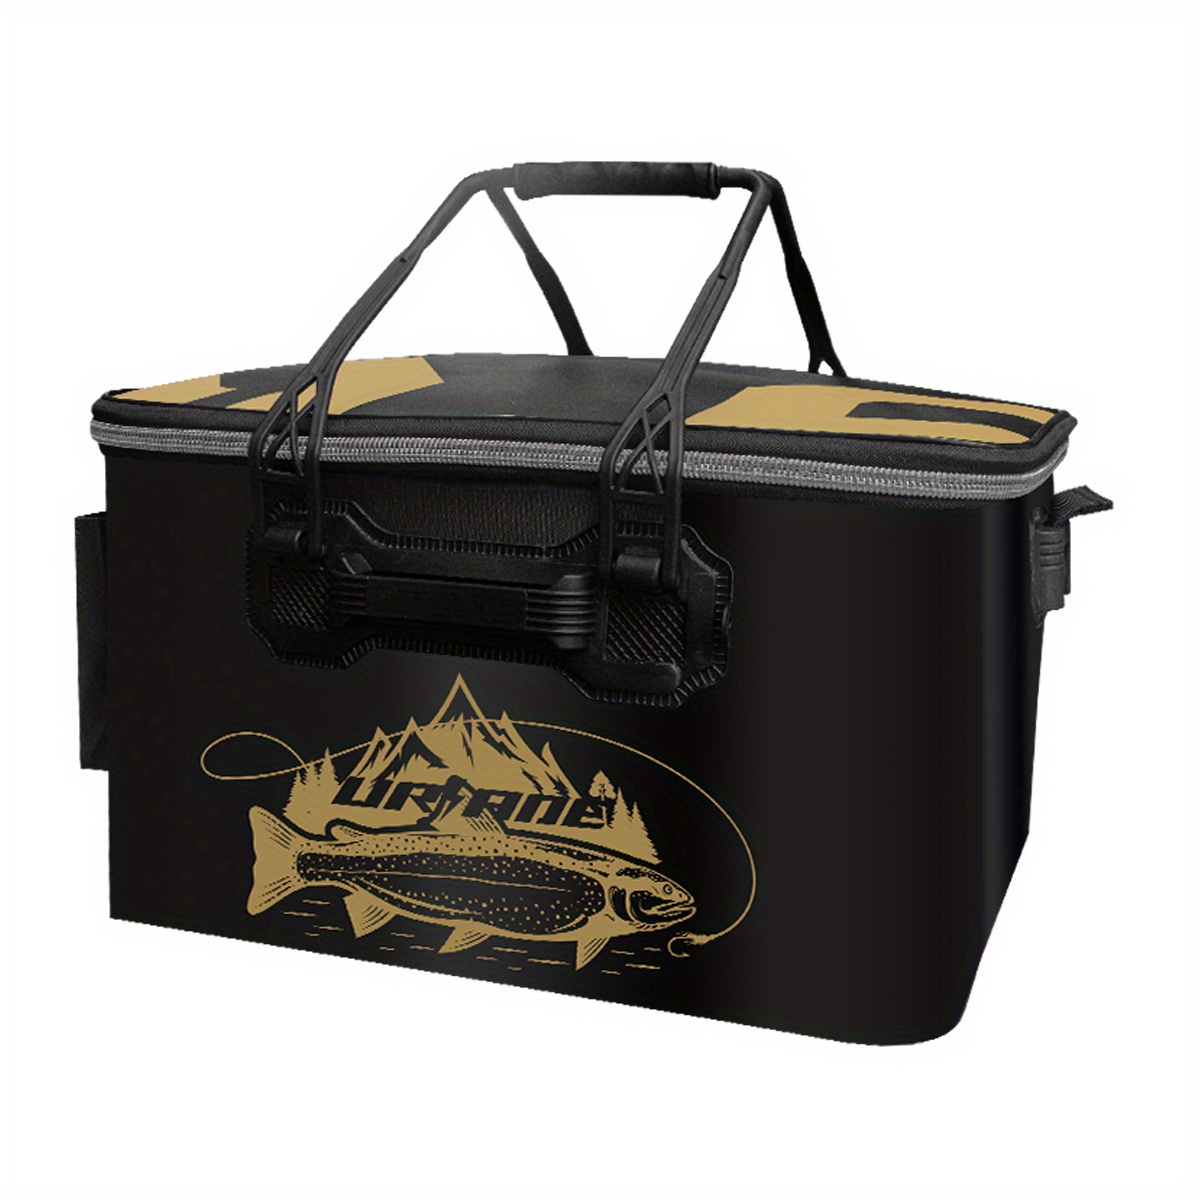 Fishing Barrel Box Large Capacity Luggage Case Hard Cover Multifunctional  Live Fish Bucket Tackle 231227 From Bian05, $191.4